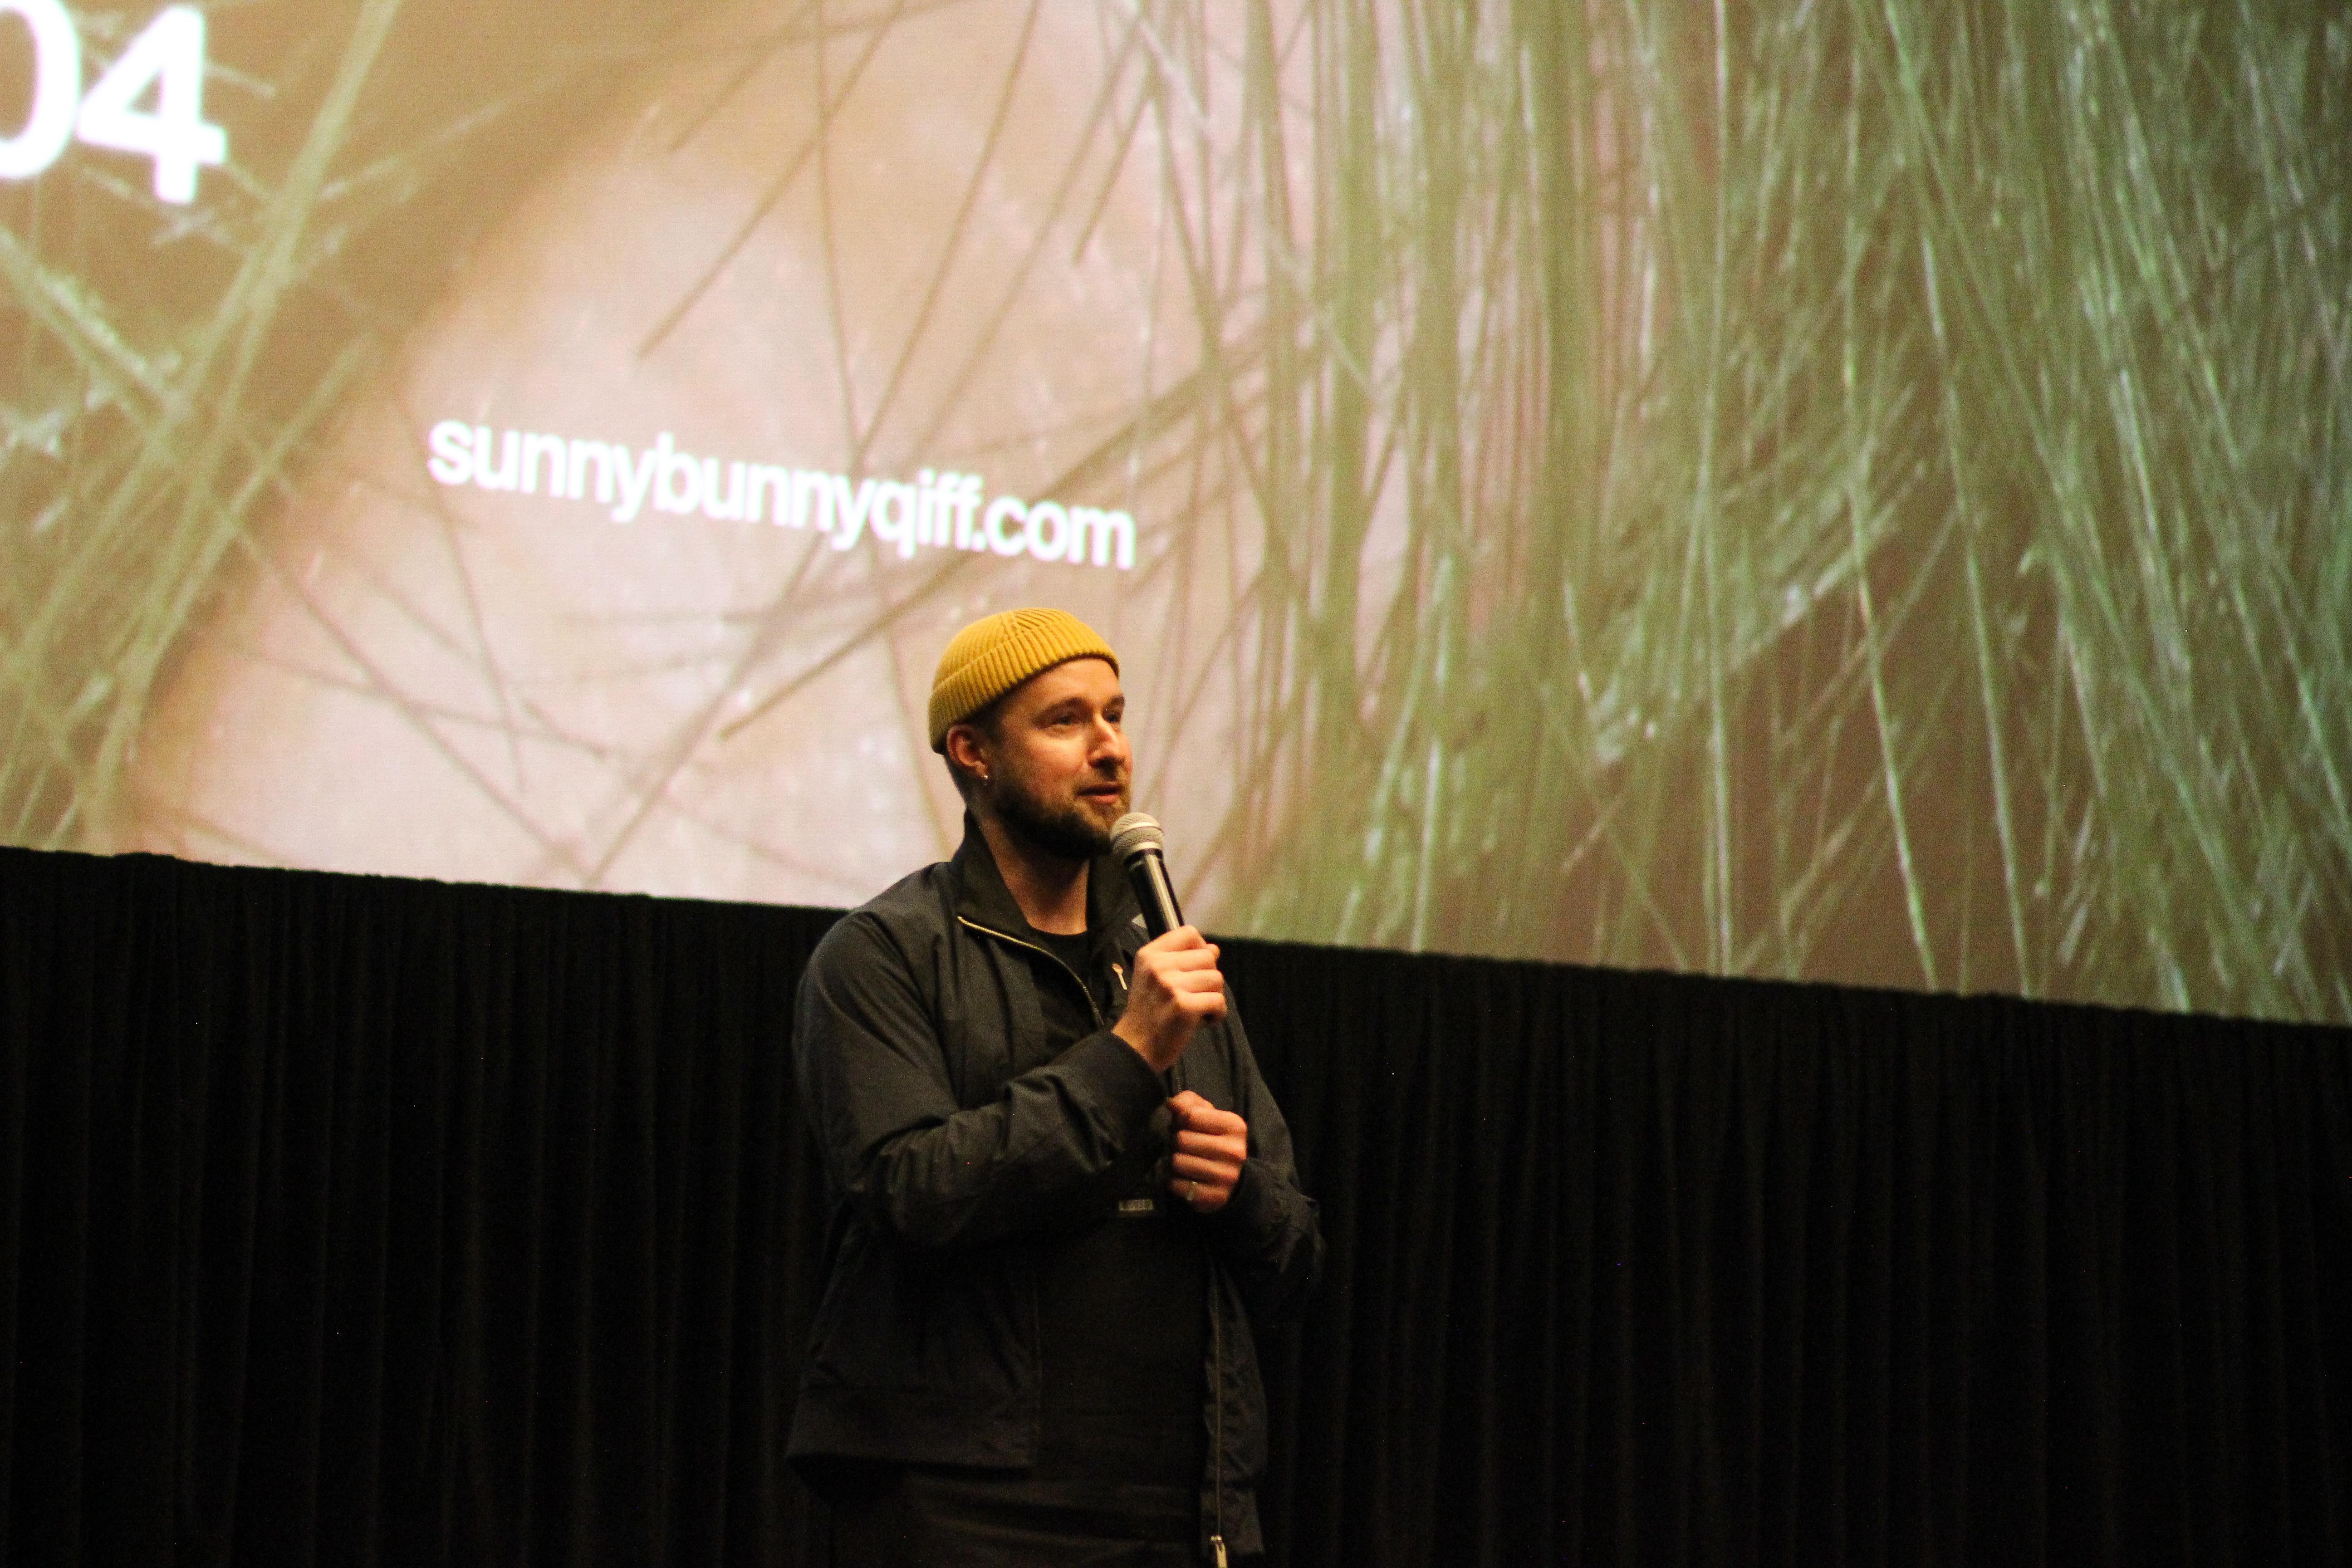 Bohdan Zhuk in yellow beanie stands in front of large movie screen, holding microphone facing unseen audience